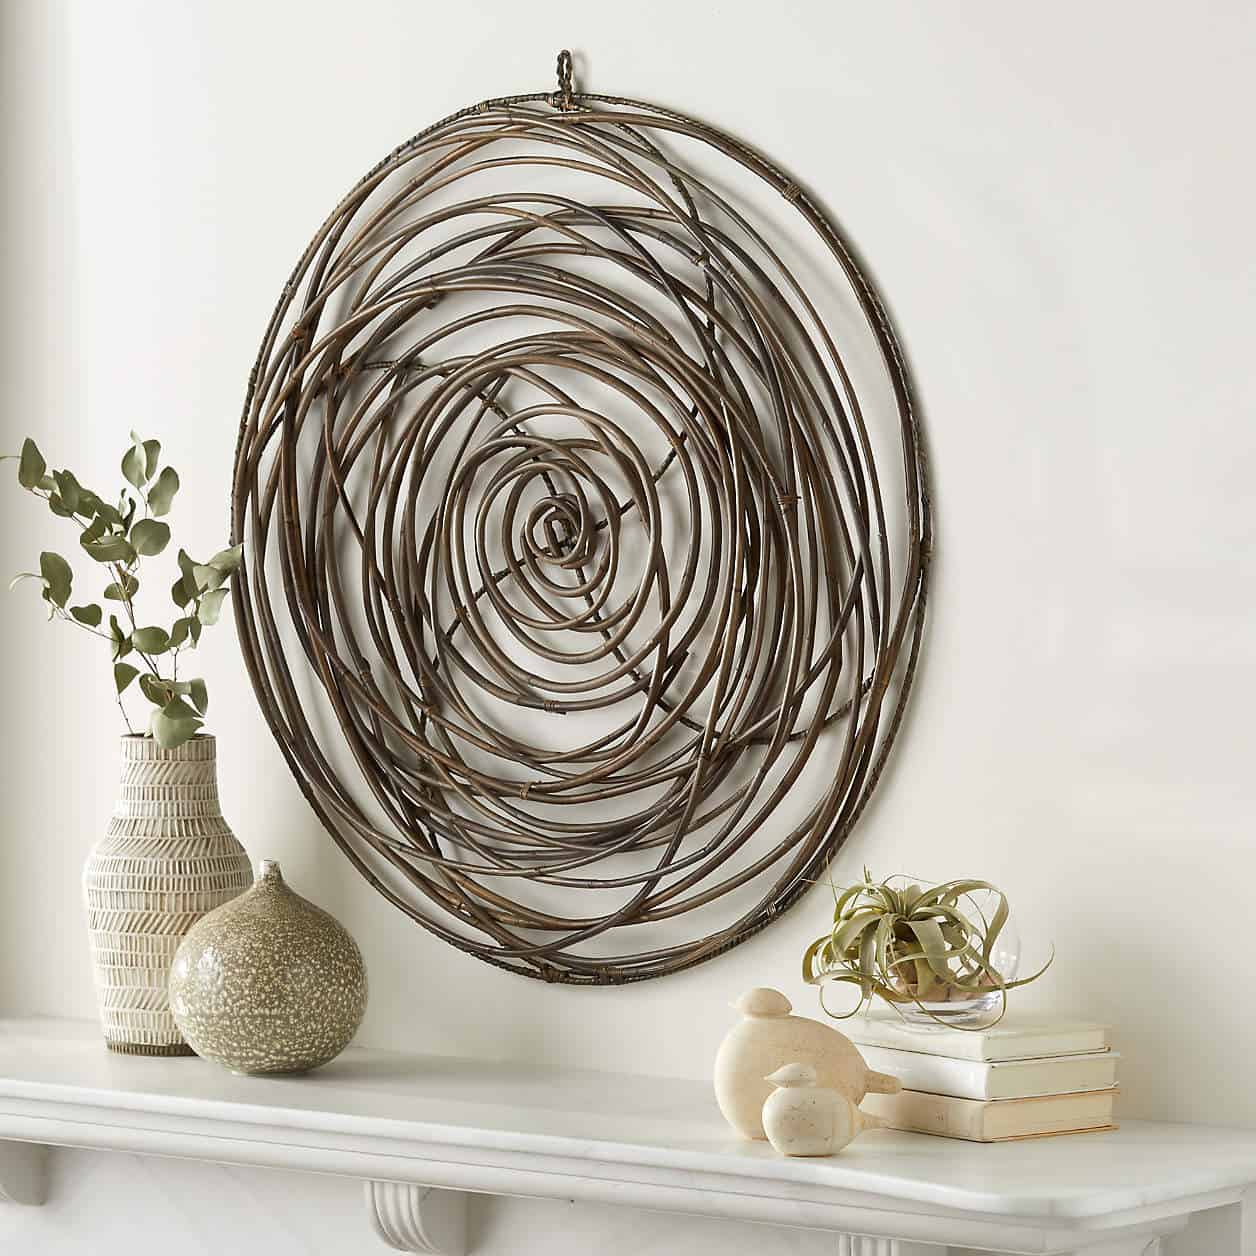 Use Rattan Scribble Art For An Abstract Flair